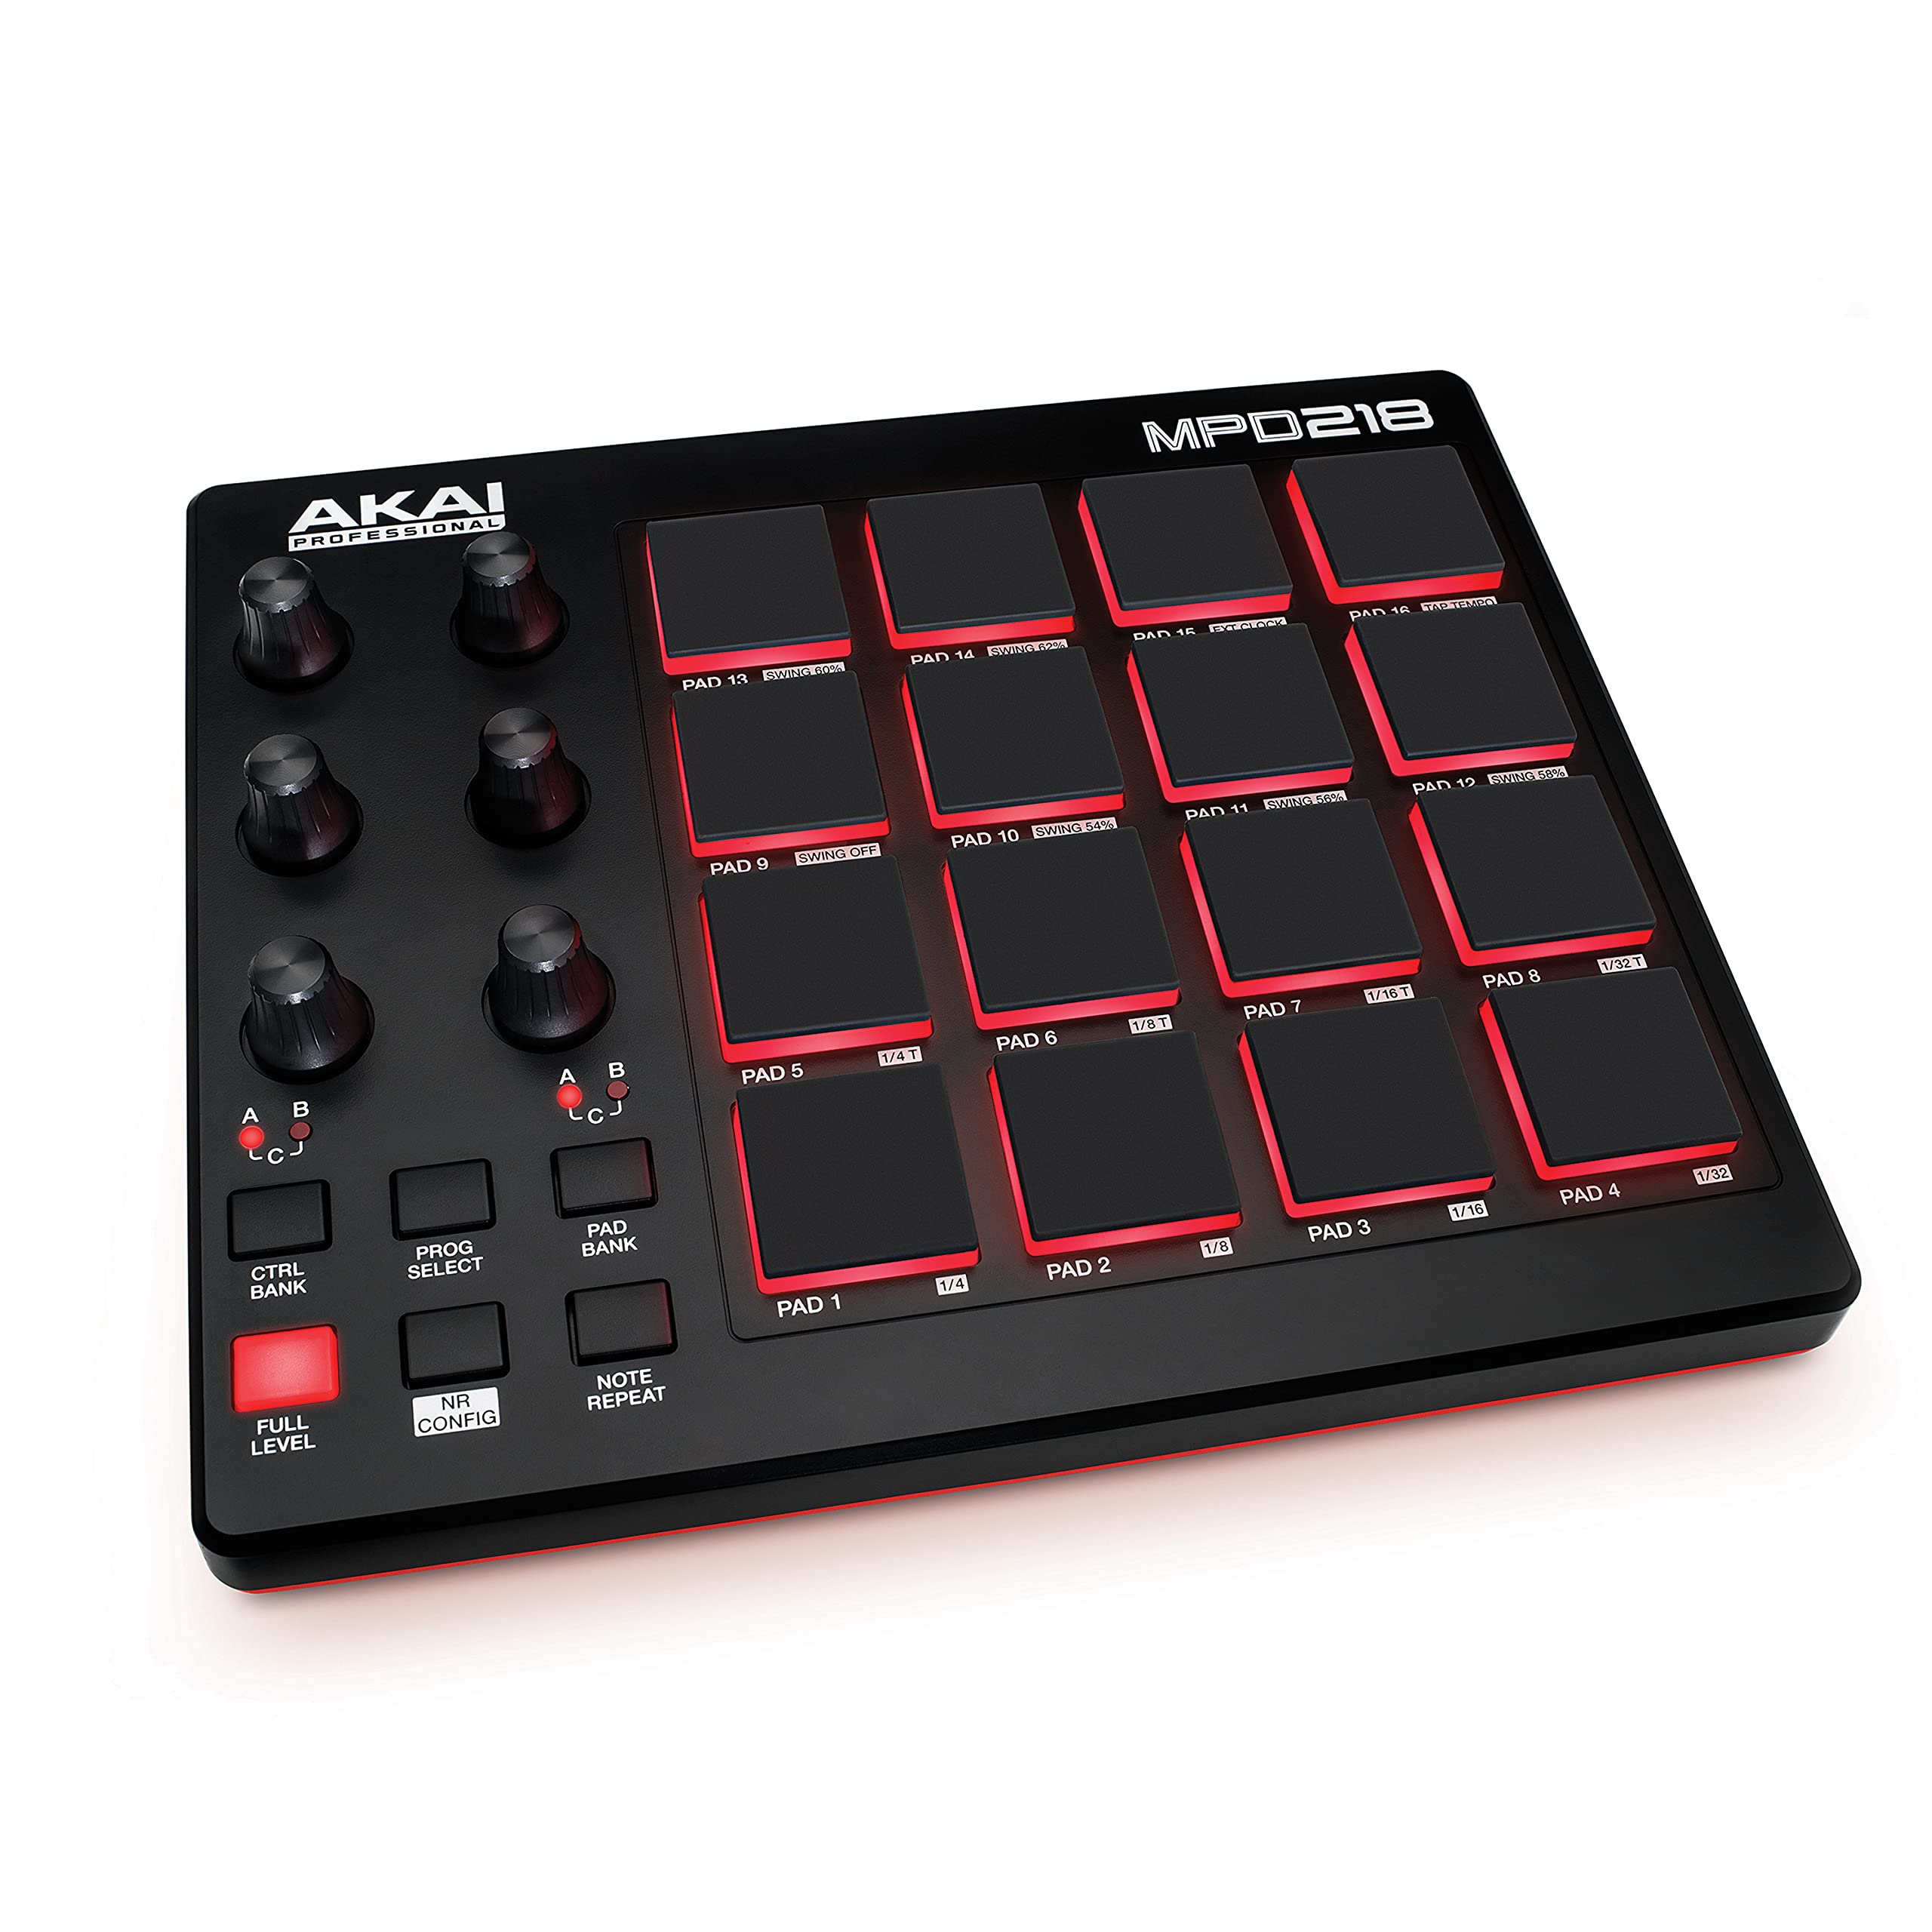 Akai Professional MPD218 - USB MIDI Controller with 16 MPC Drum Pads, 6 Assignable Knobs, Note Repeat & Full Level Buttons and Production Software